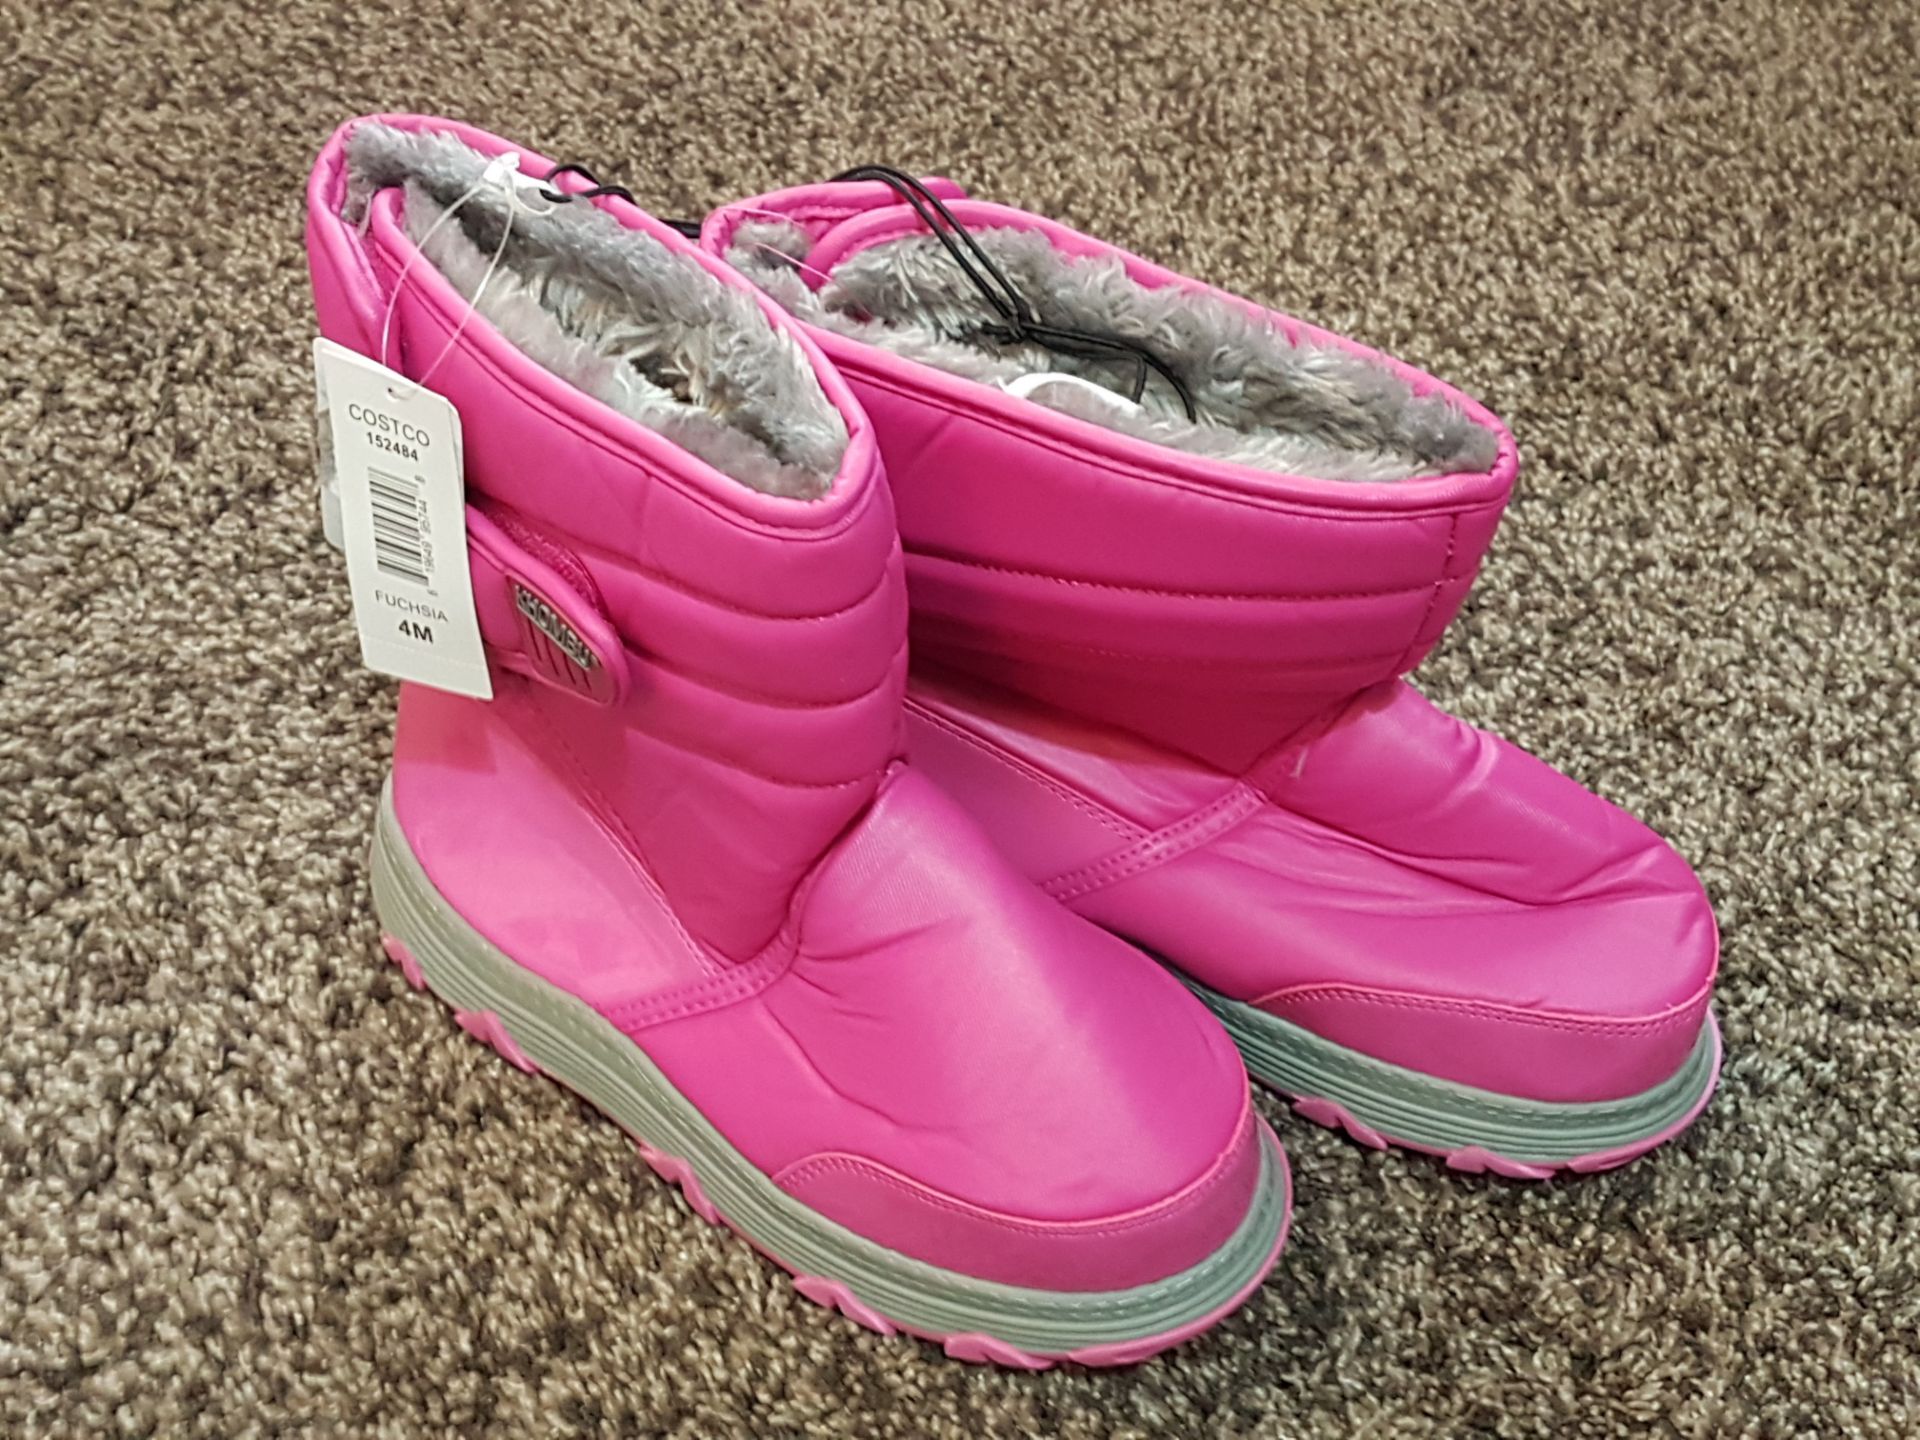 Brand New Unboxed Khombu Pink Snow Winter Boots Size 4 RRP £30